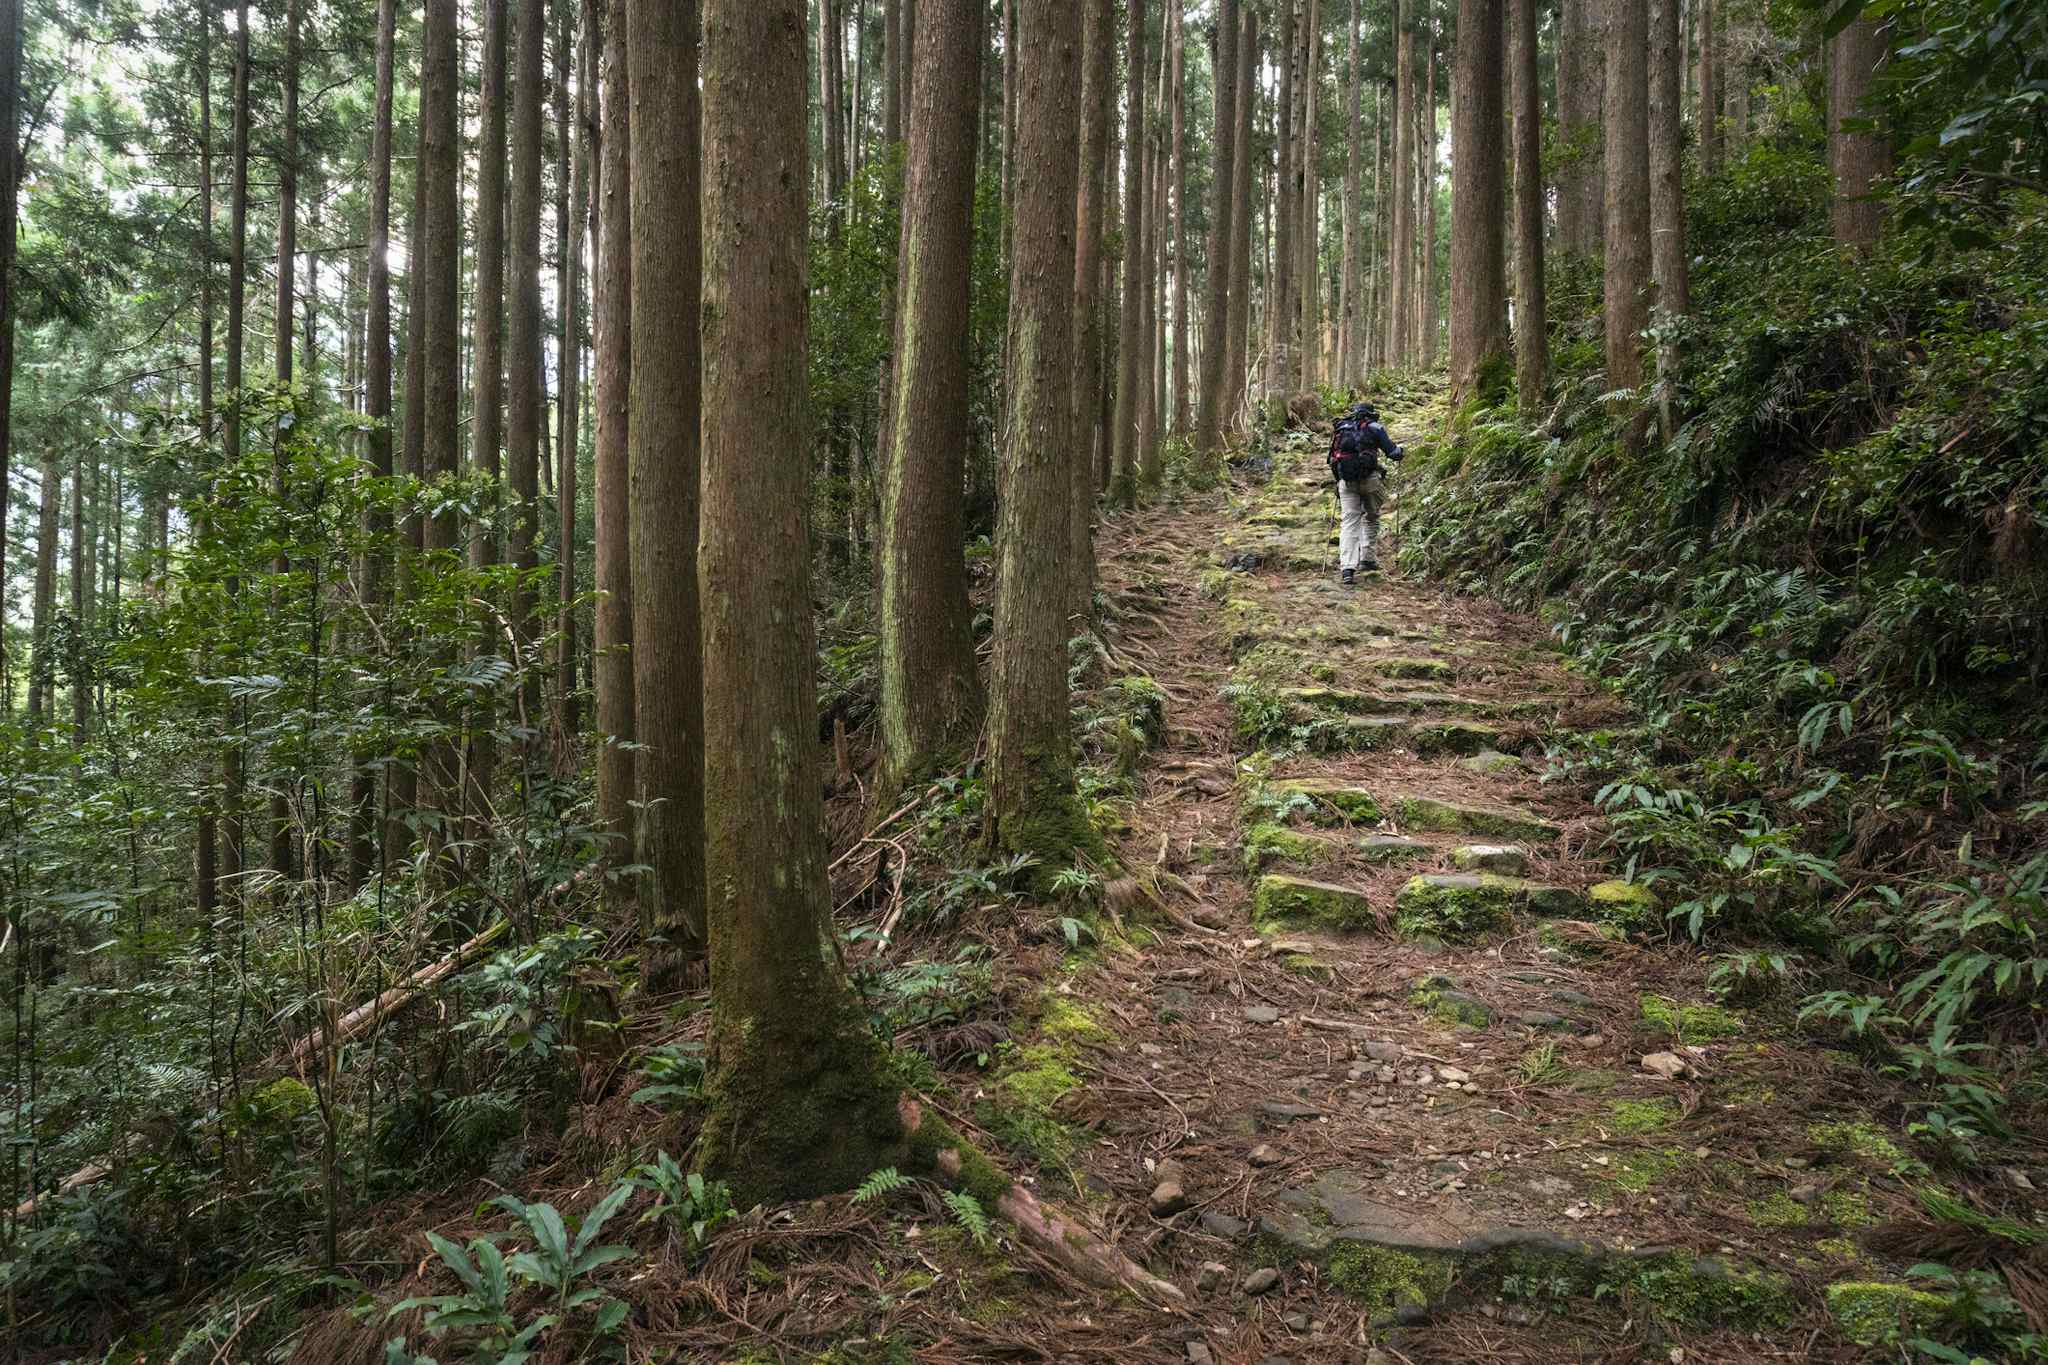 Forest hikes along the Nakechi Section of the Kumano Kodo. Photo: Getty.